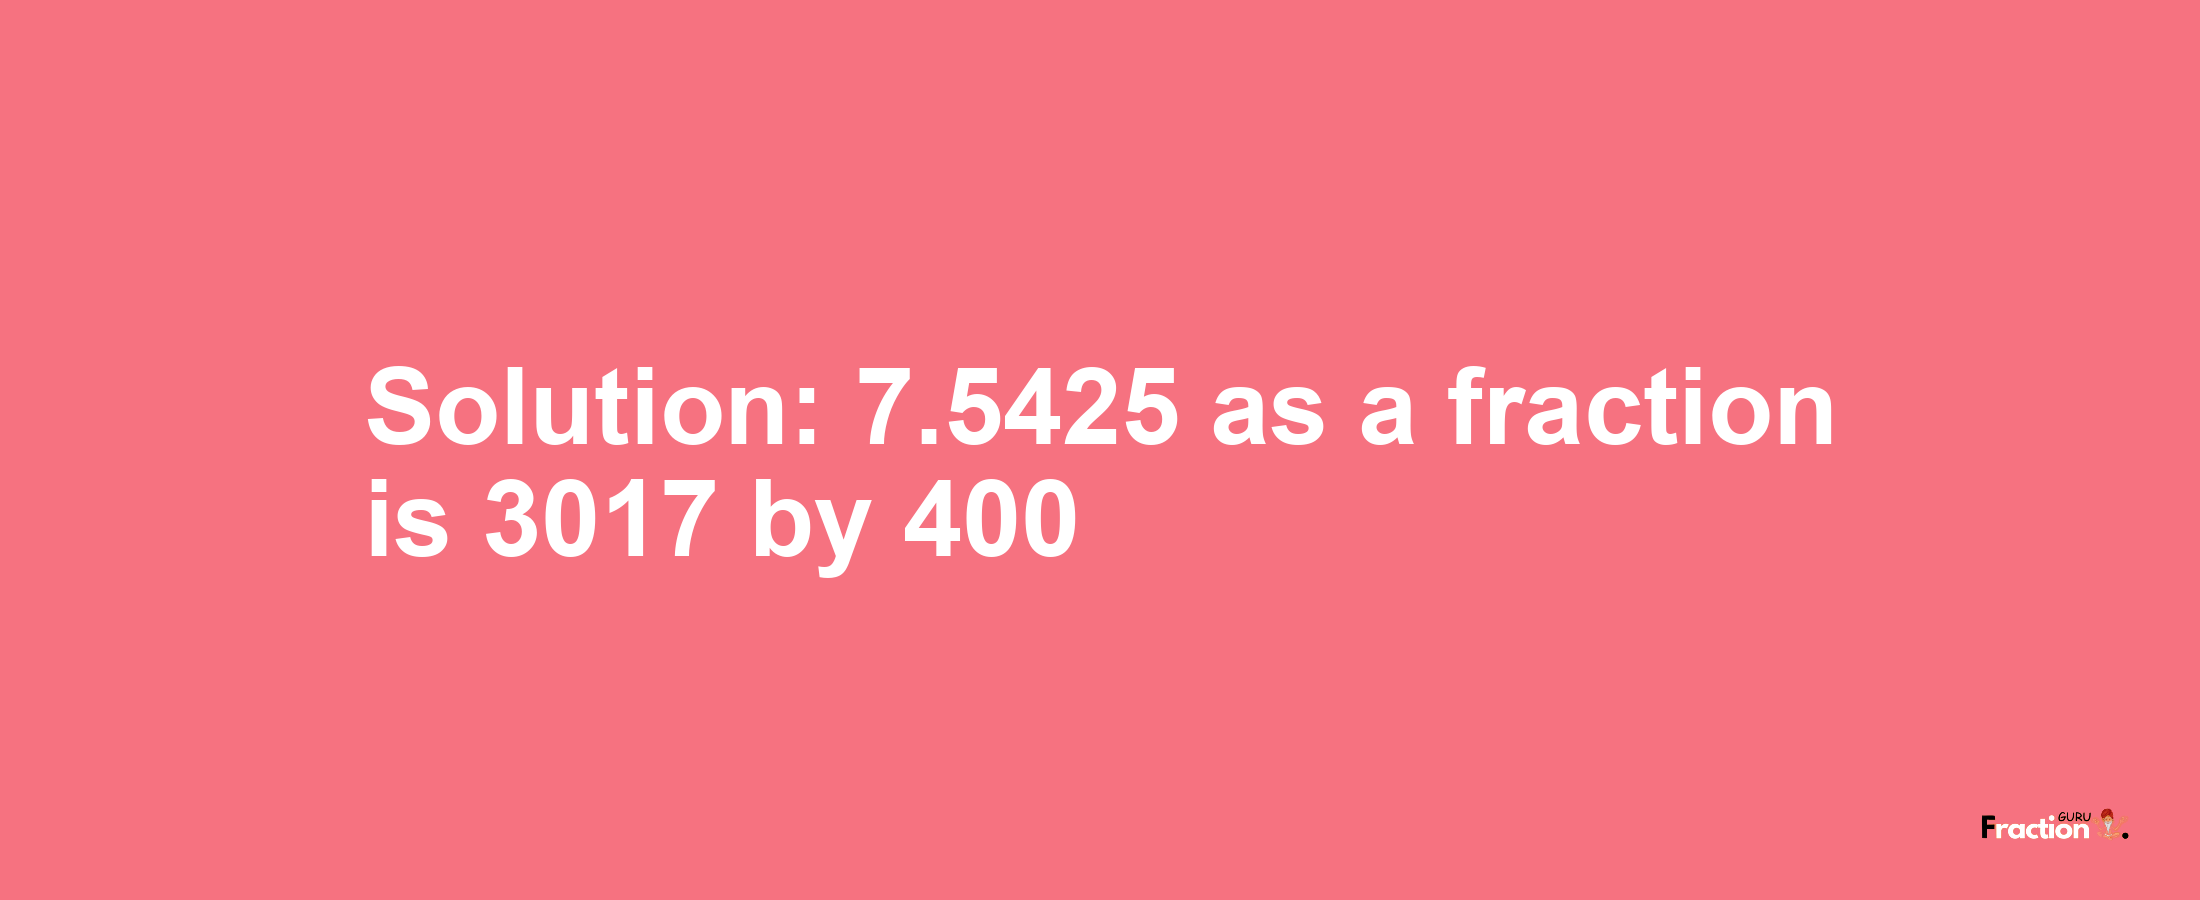 Solution:7.5425 as a fraction is 3017/400